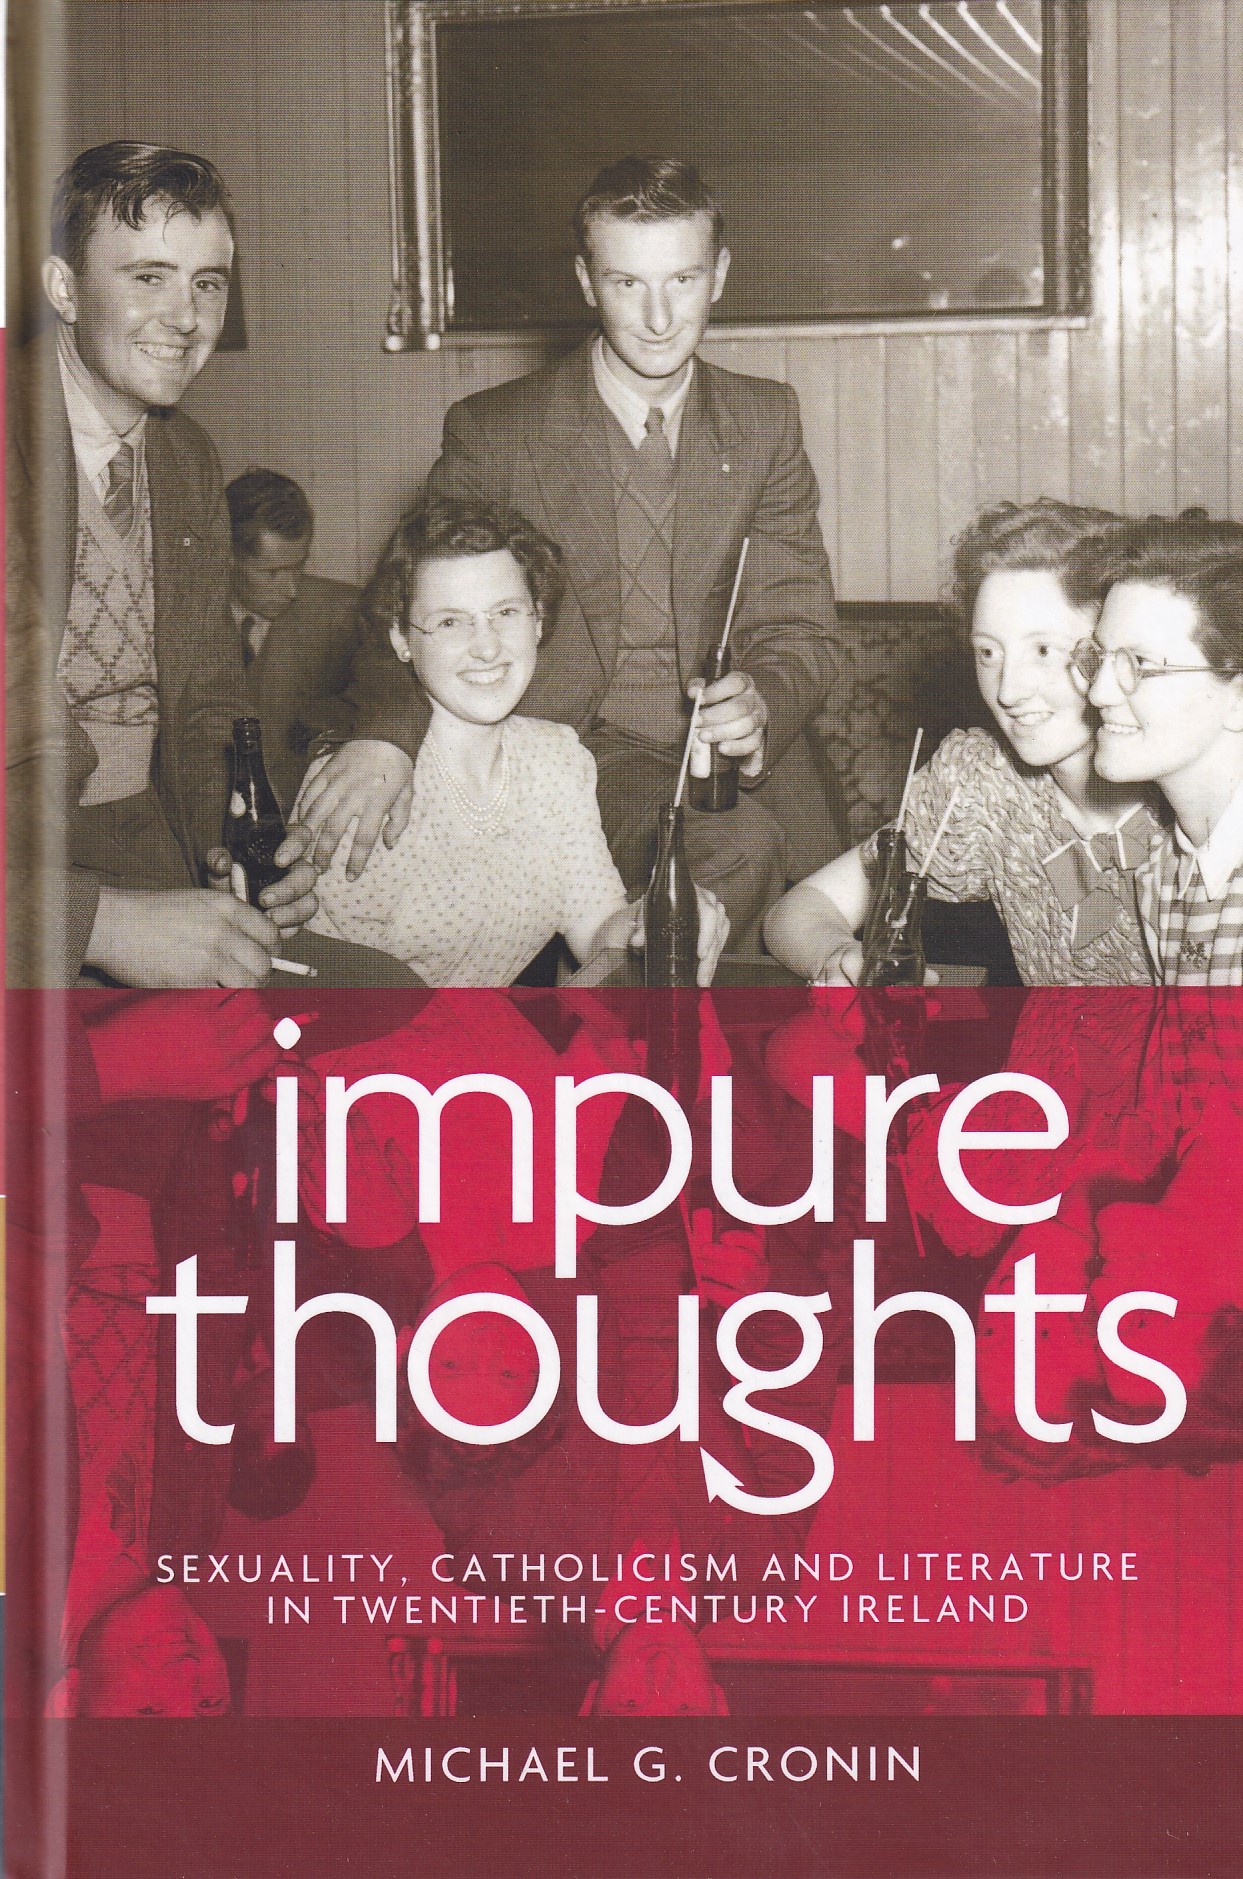 Impure thoughts Sexuality, Catholicism and literature in twentieth-century Ireland | Michael G. Cronin | Charlie Byrne's